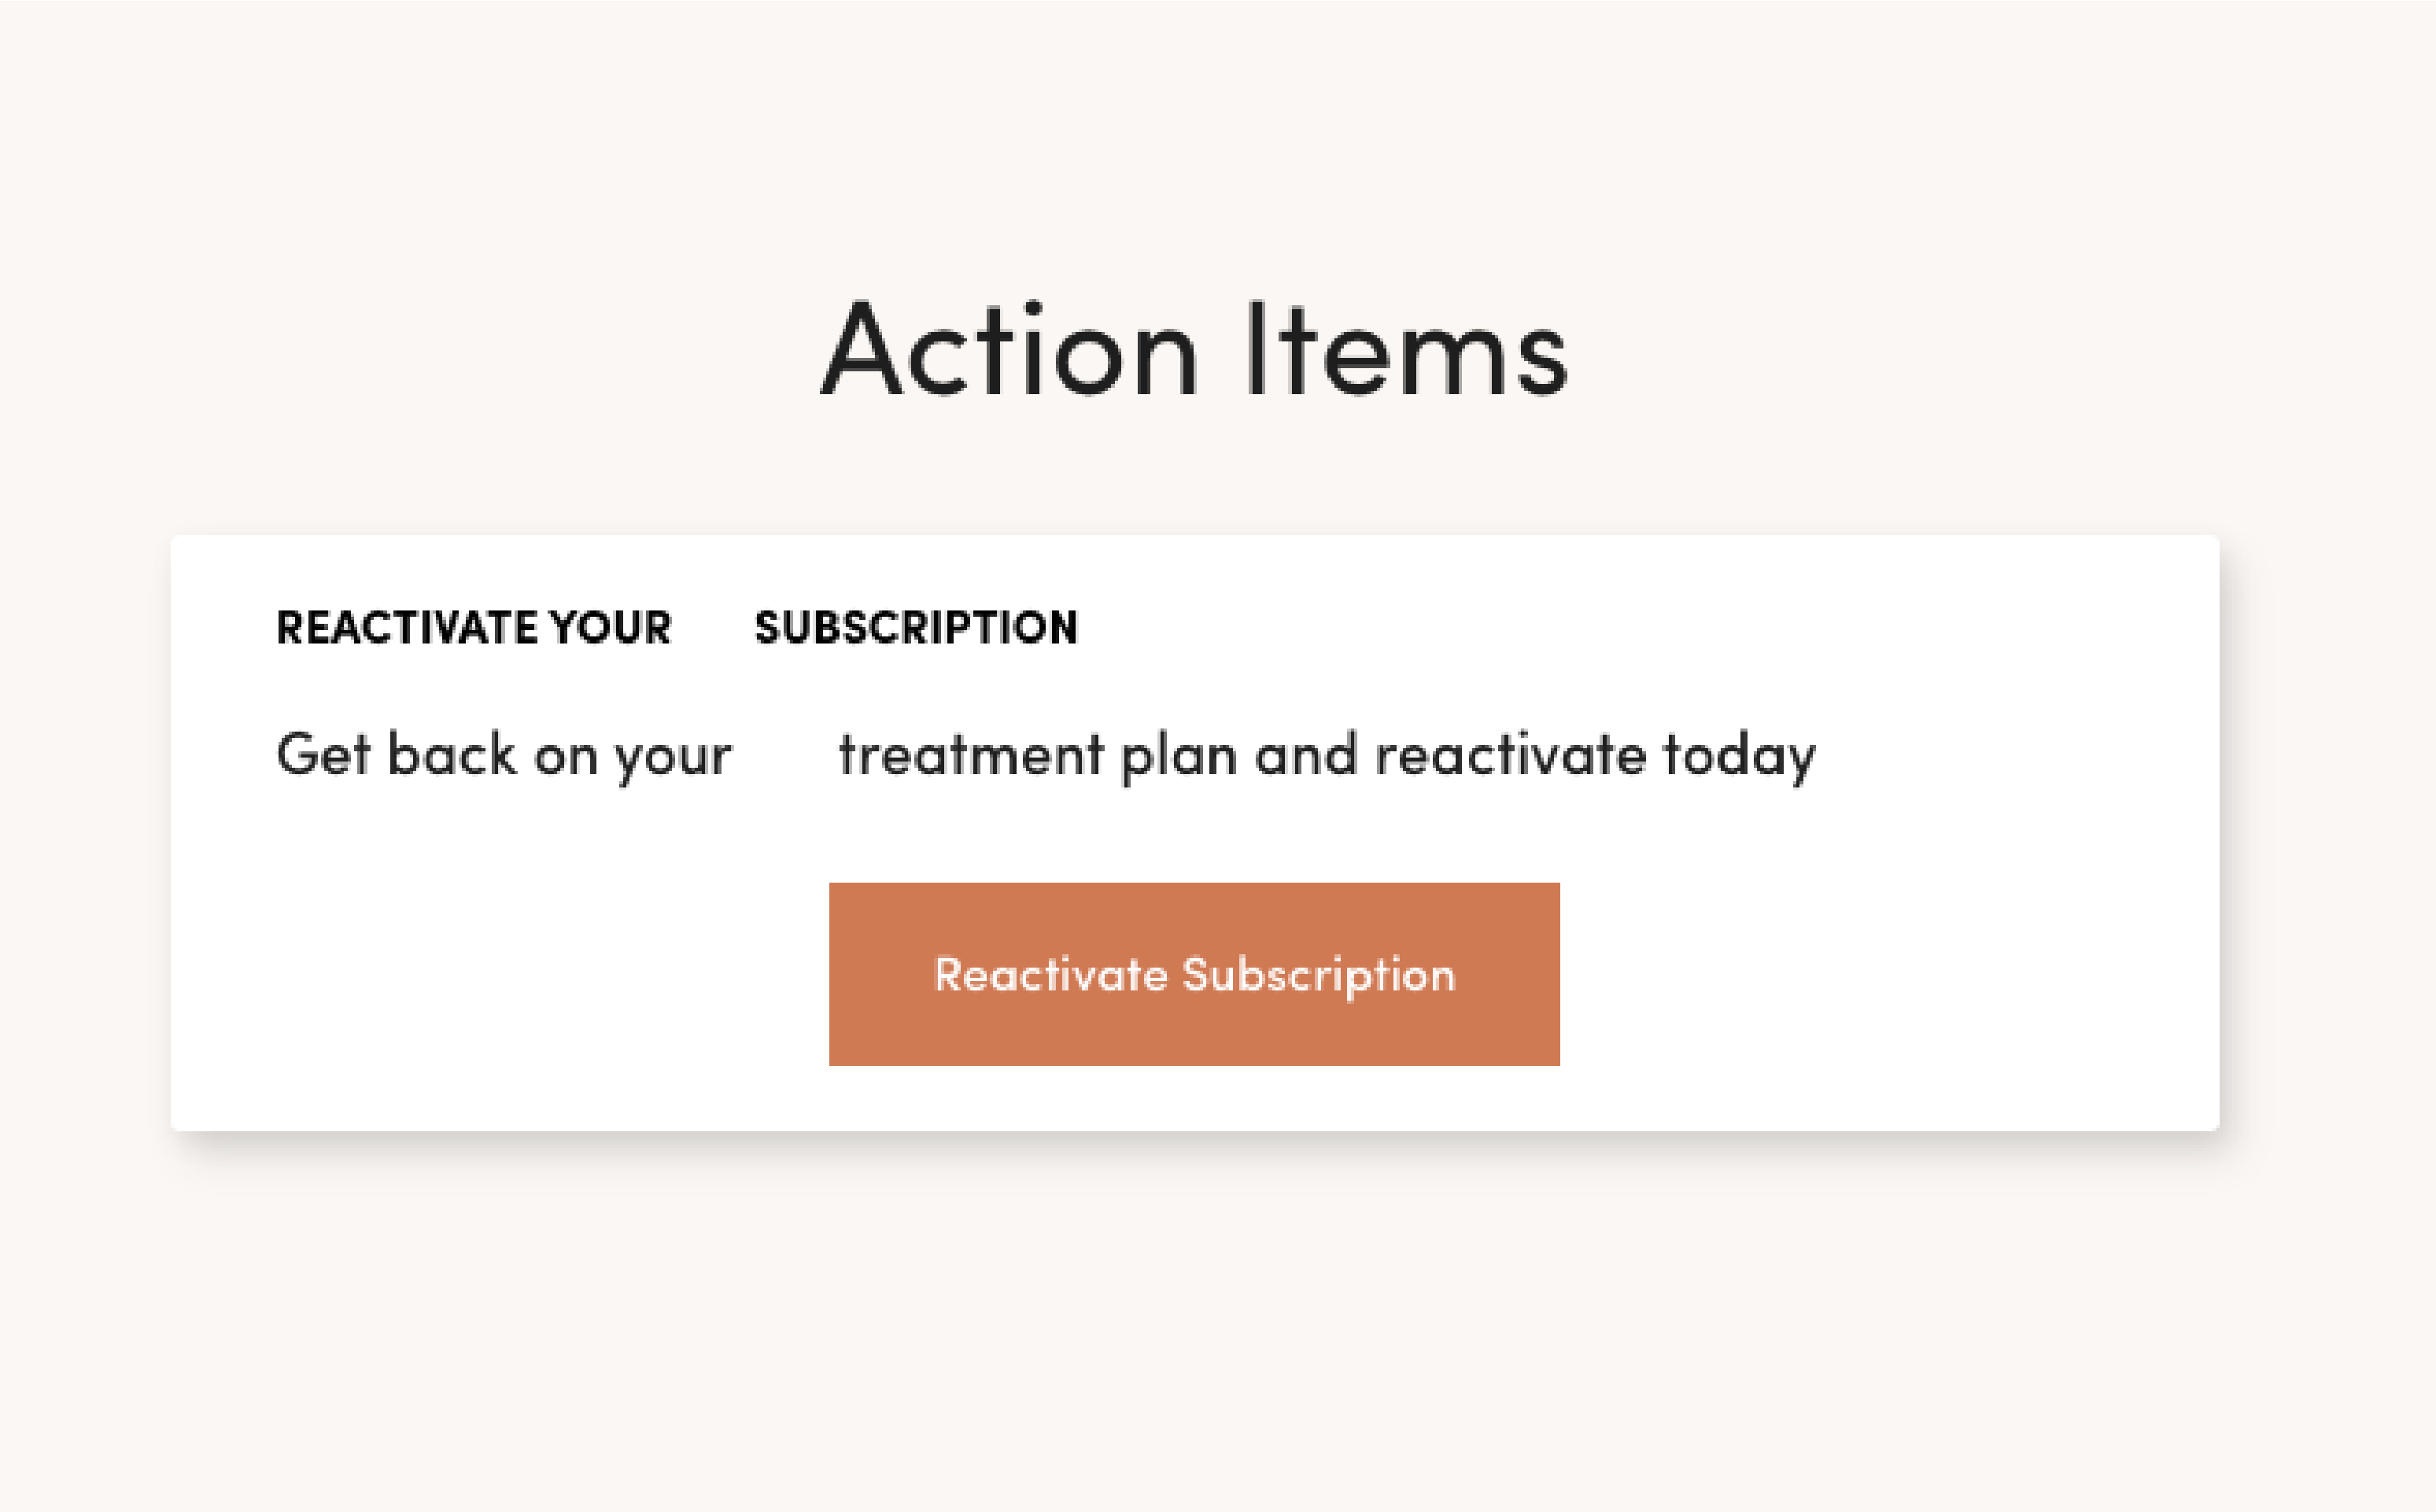 Hims Action Items Remind Users to Reactivate